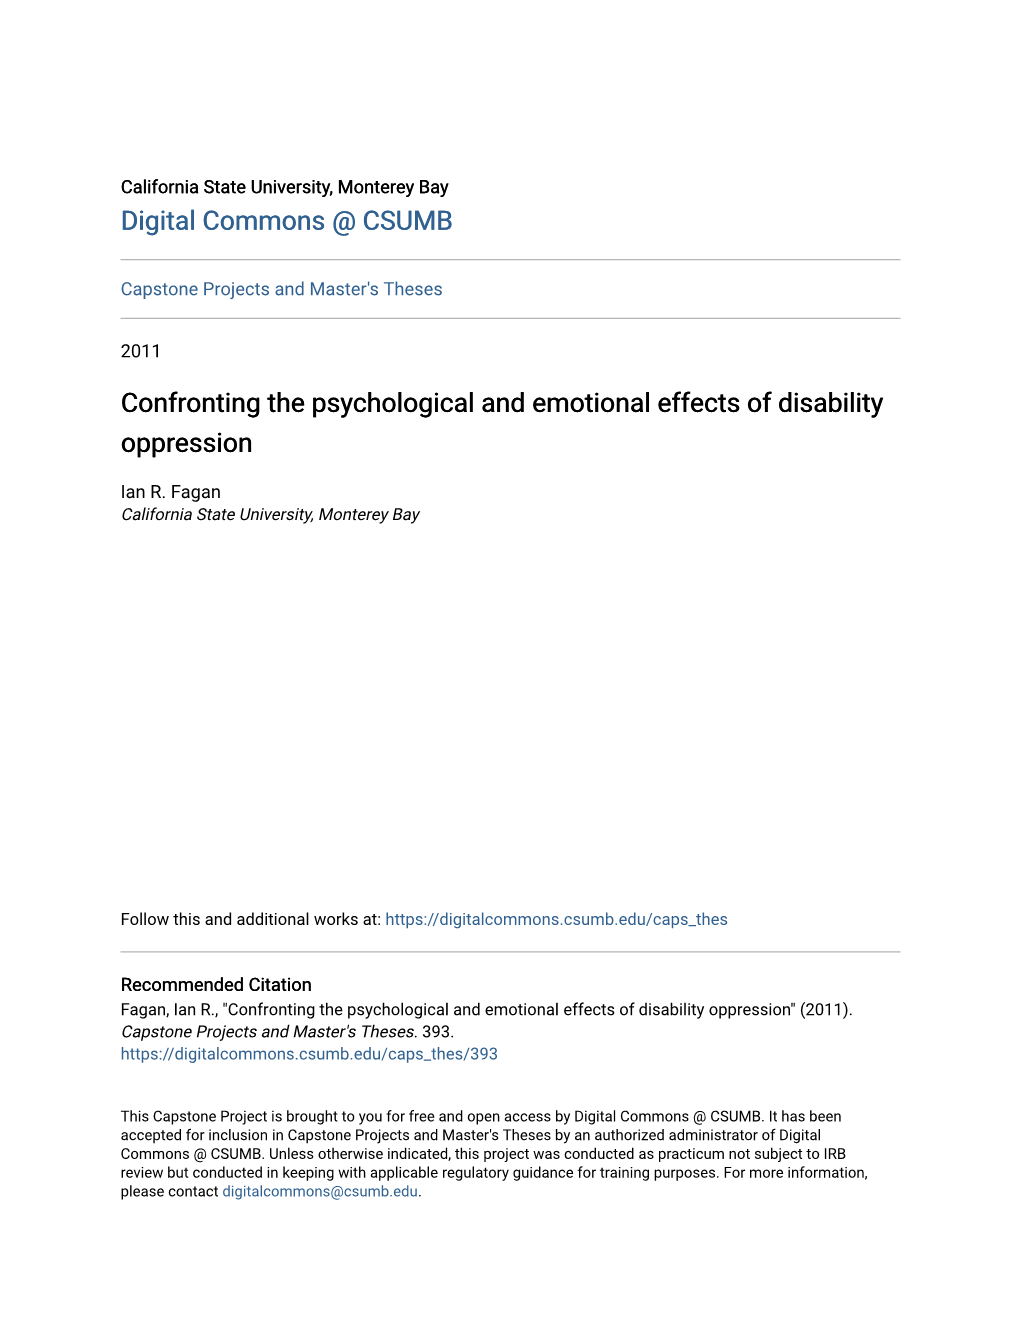 Confronting the Psychological and Emotional Effects of Disability Oppression